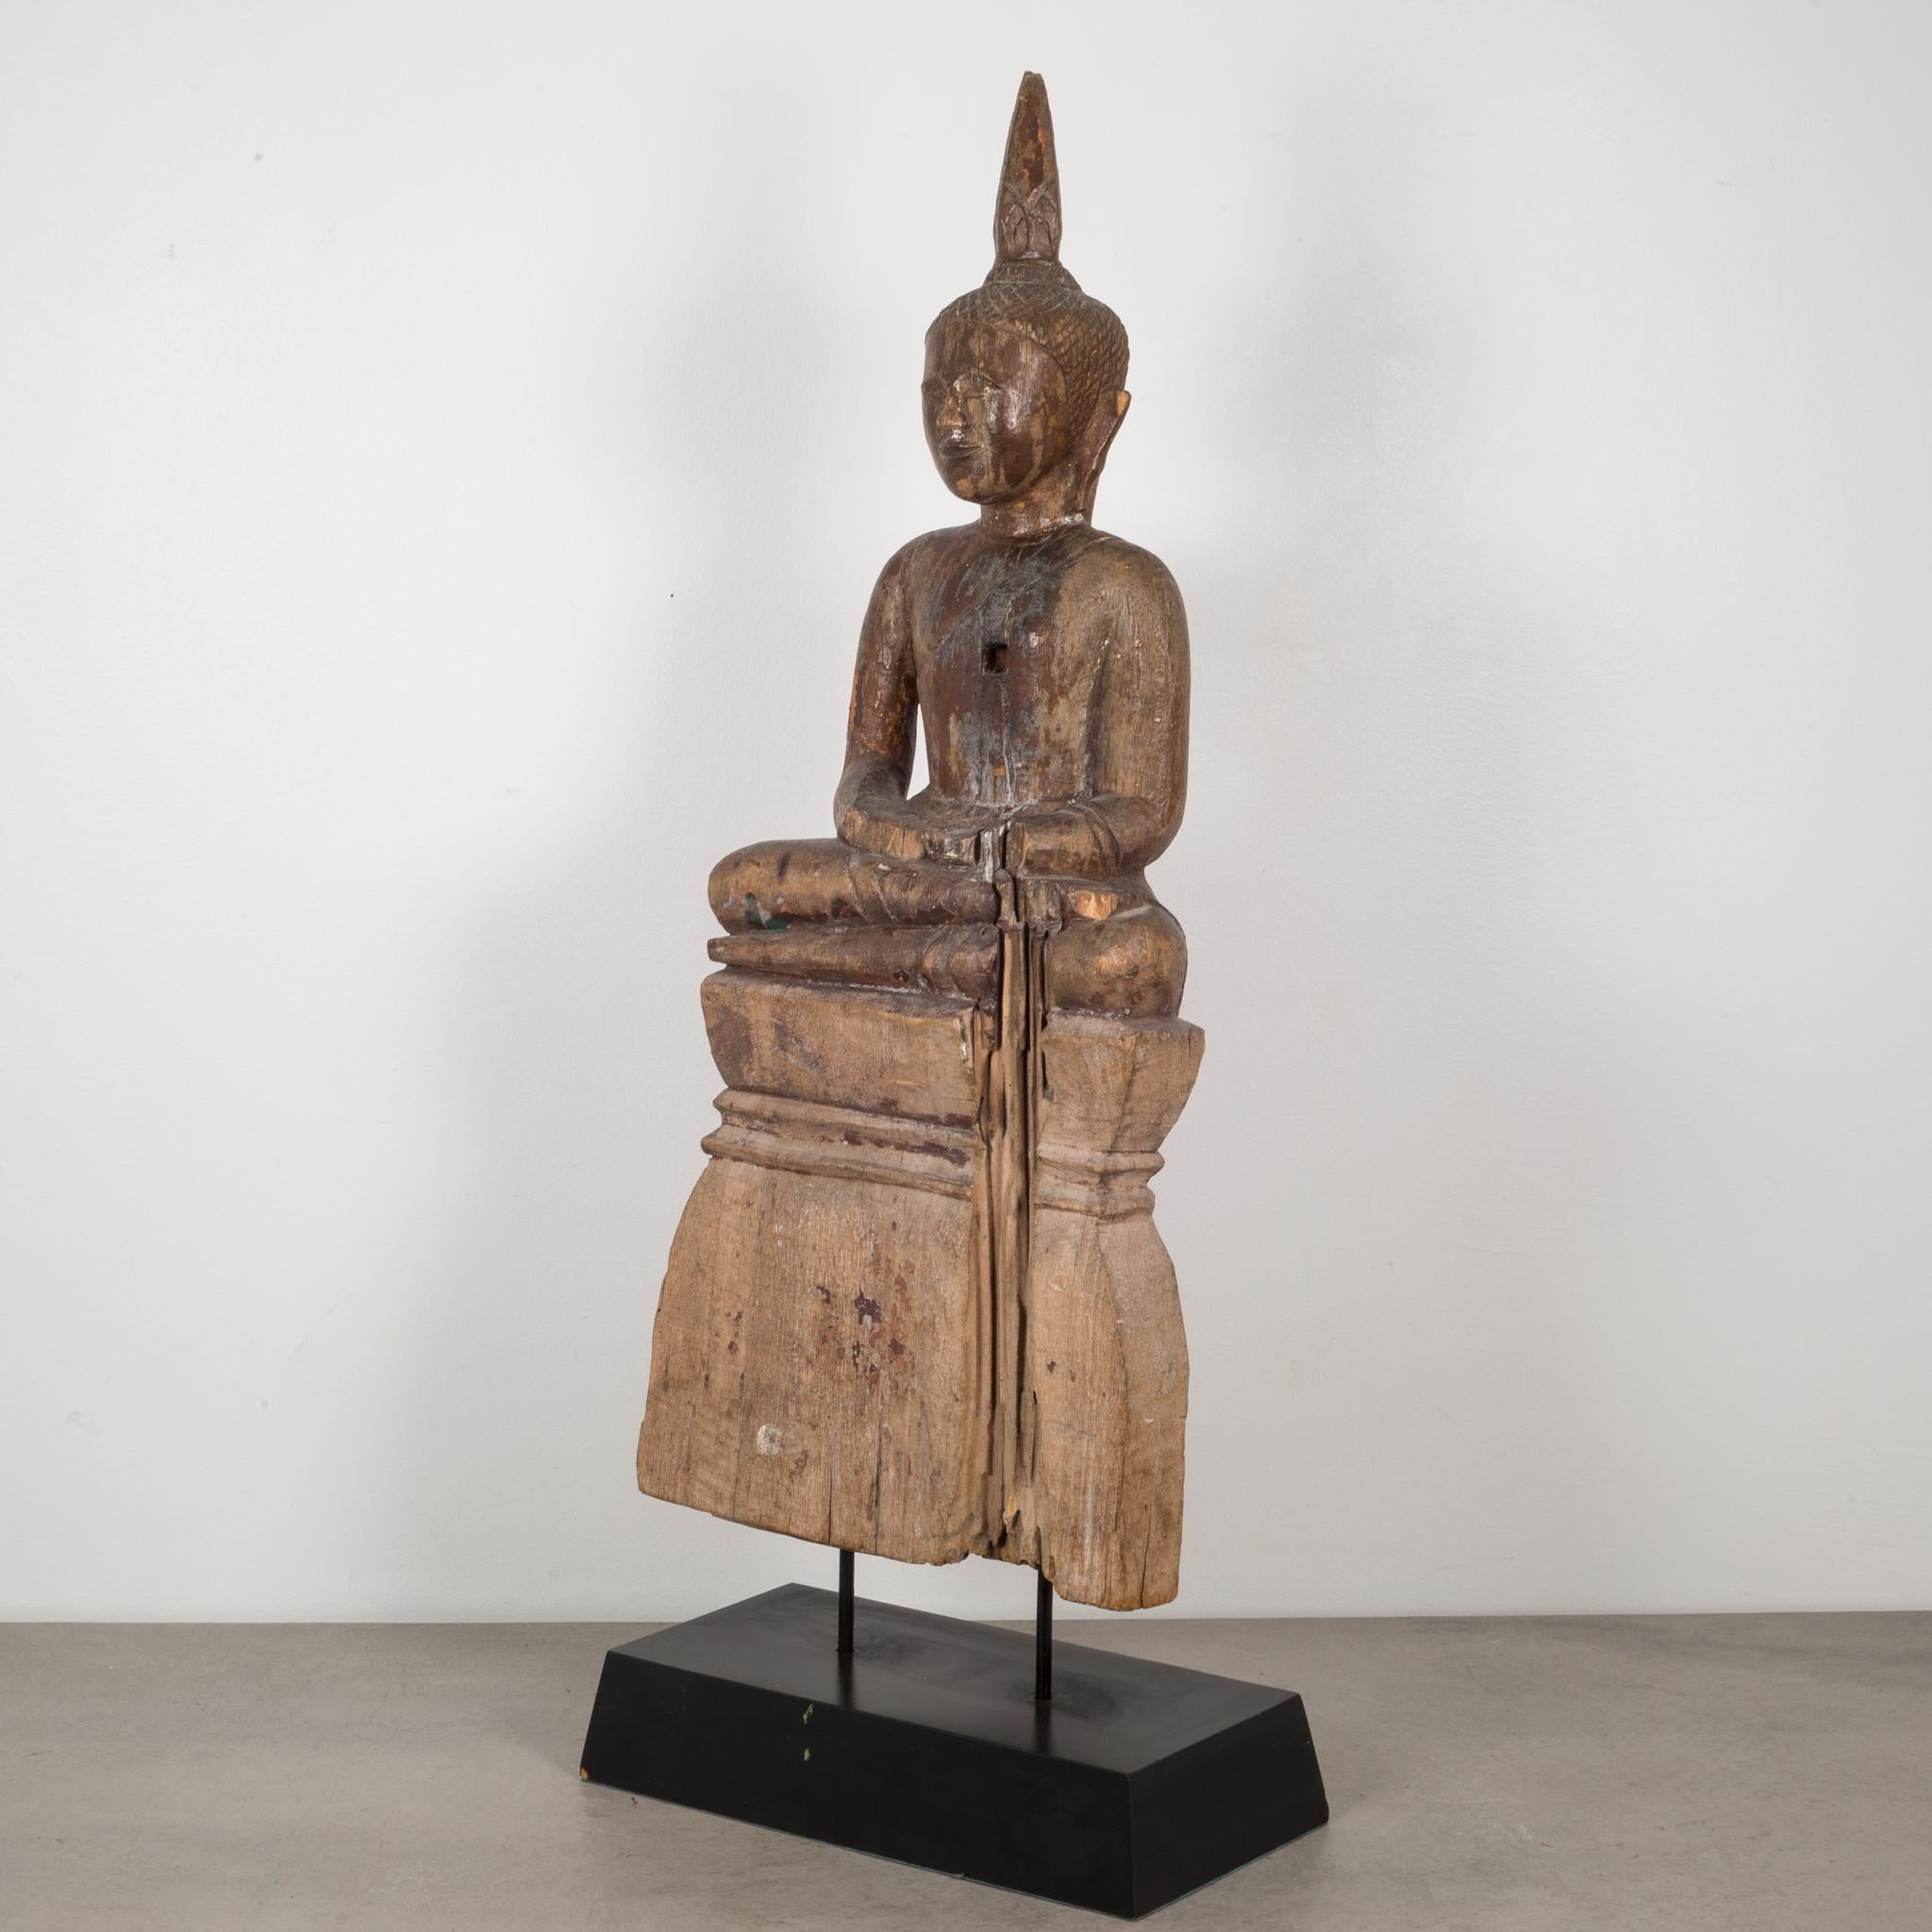 About

A carved wooden Thai Buddha mounted on a custom wooden plinth.

 Creator: unknown.
Date of manufacture: circa 1700-1899. Thailand.
Materials and techniques: Wood.
Condition: Good. Wear consistent with age and use.
Dimensions: H 26.5